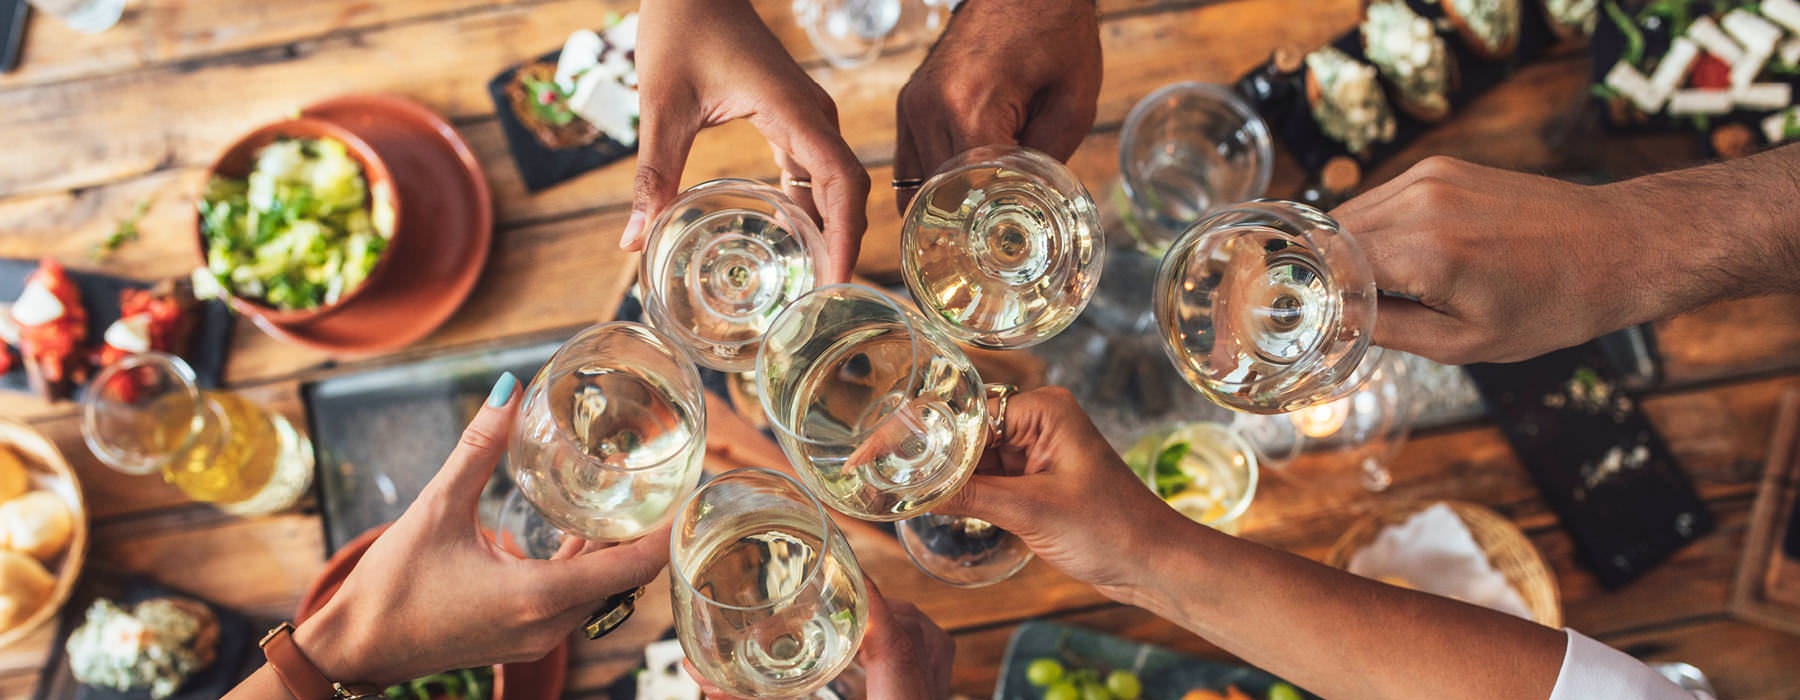 residents toast glasses around large dinner table